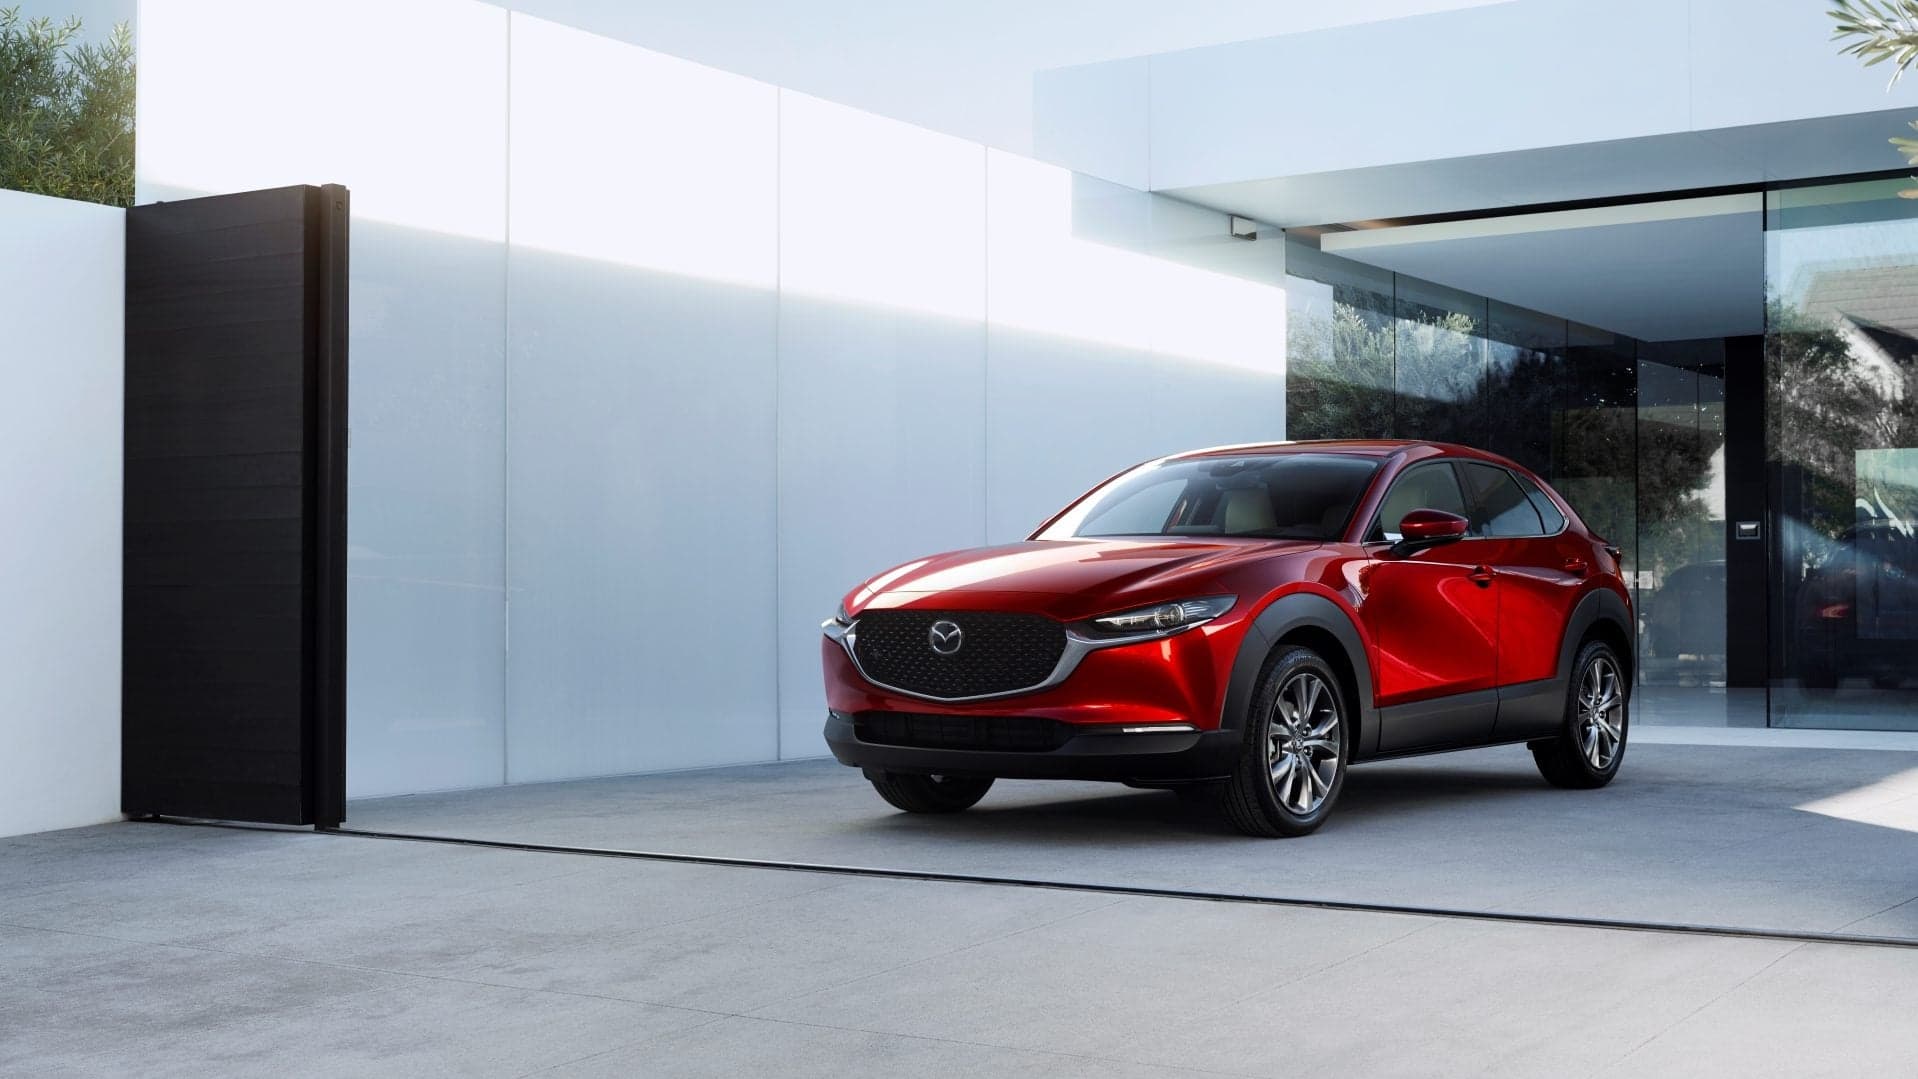 2020 Mazda CX-30: New Skyactiv-X and Manual Transmission Give us Hope for Something Great